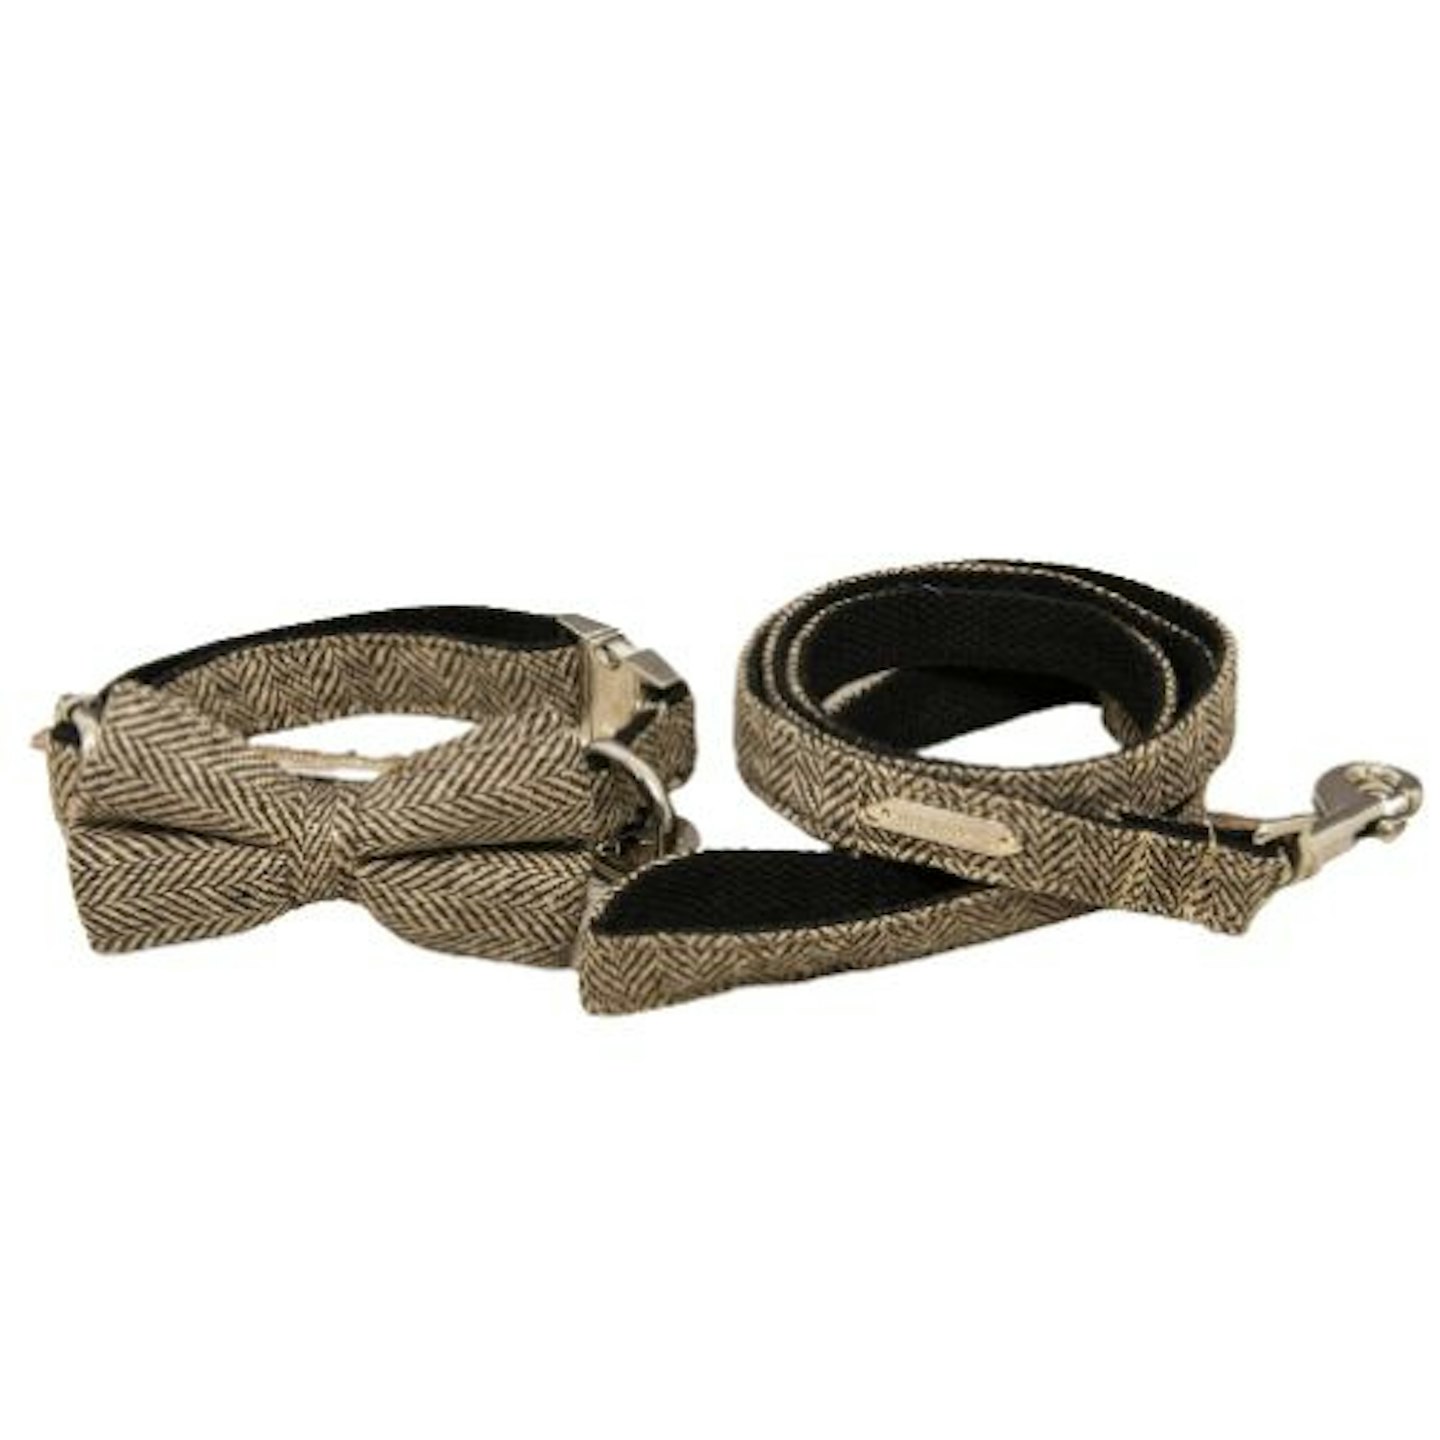 The Beaufort Tweed Dog Collar Bow Tie And Lead Set